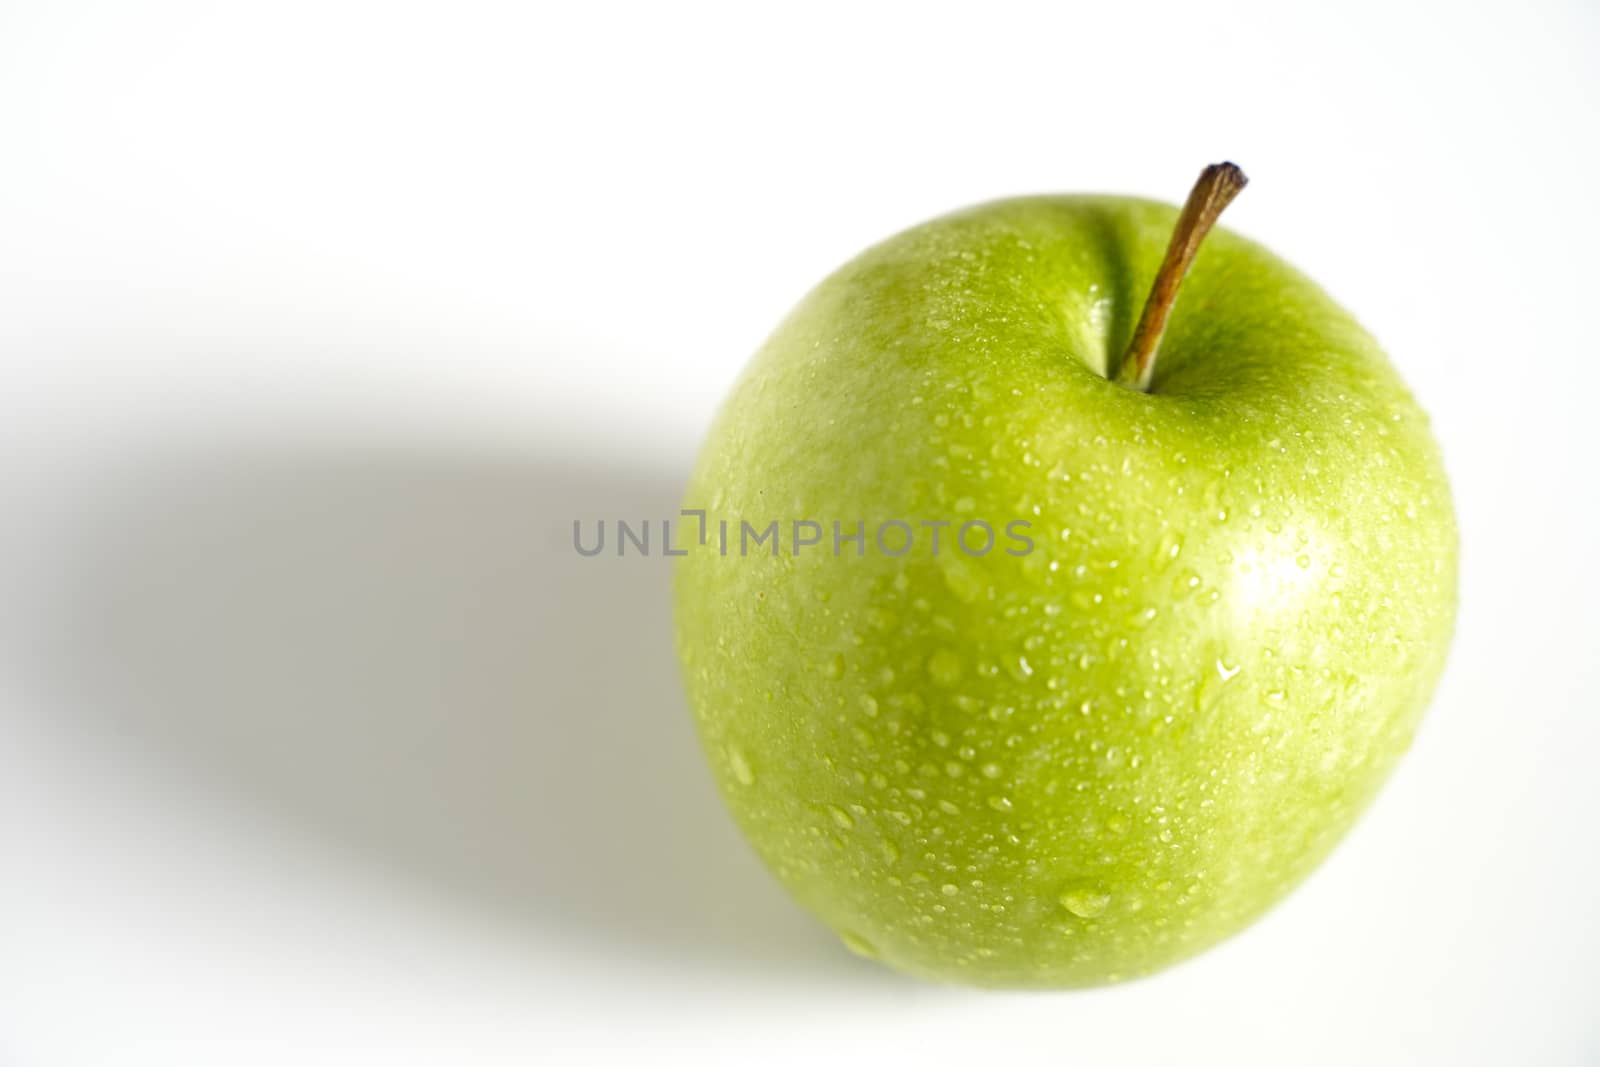 A Granny Smith Green Apple by samULvisuals